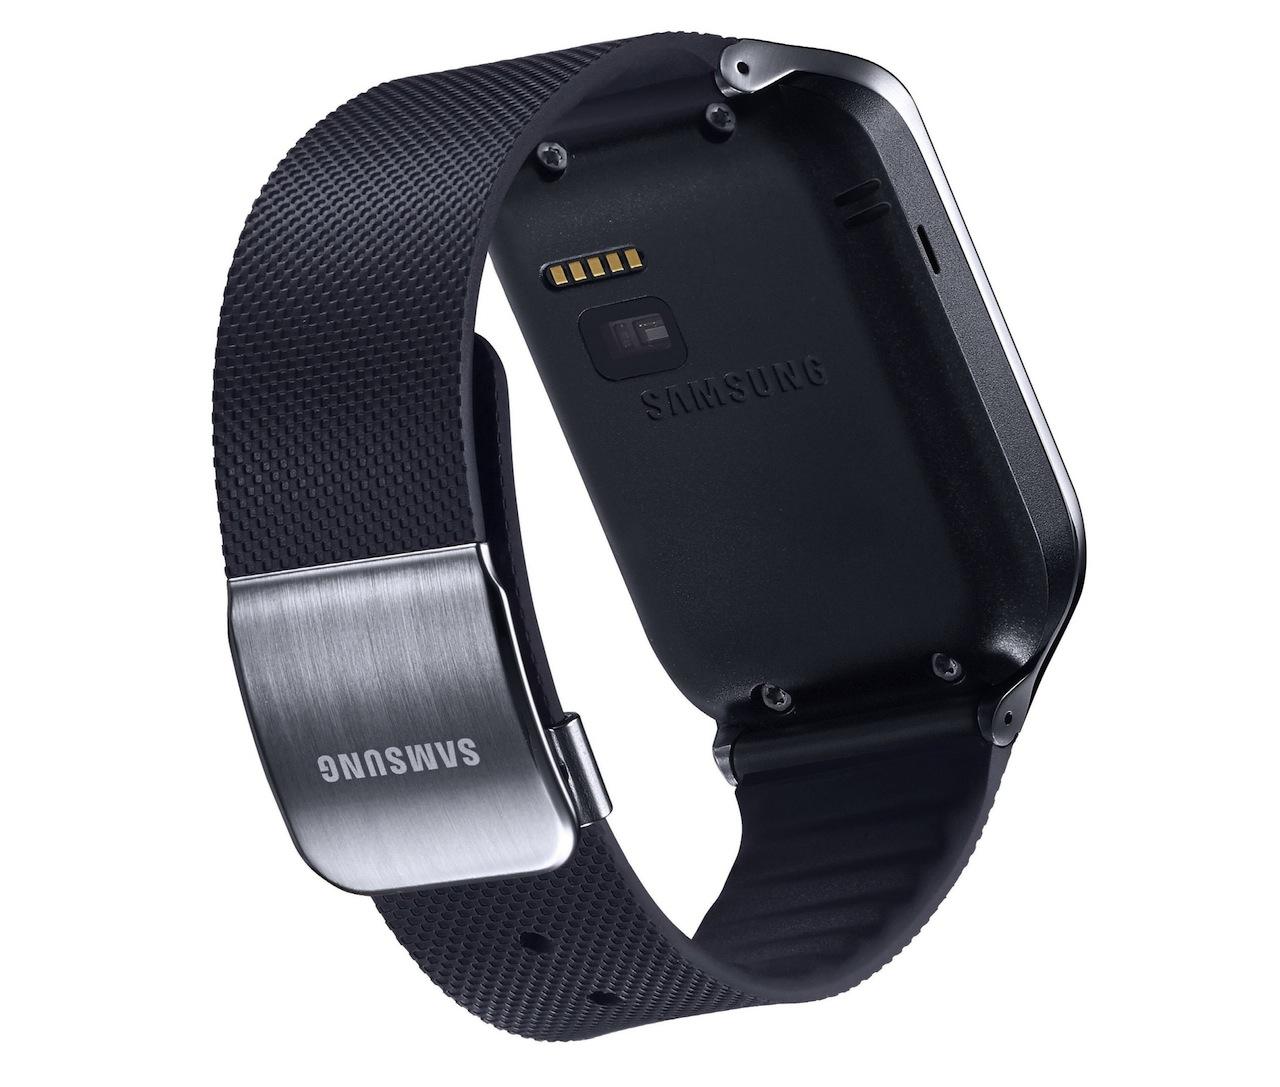 Samsung 2 Gear Neo smartwatches official -